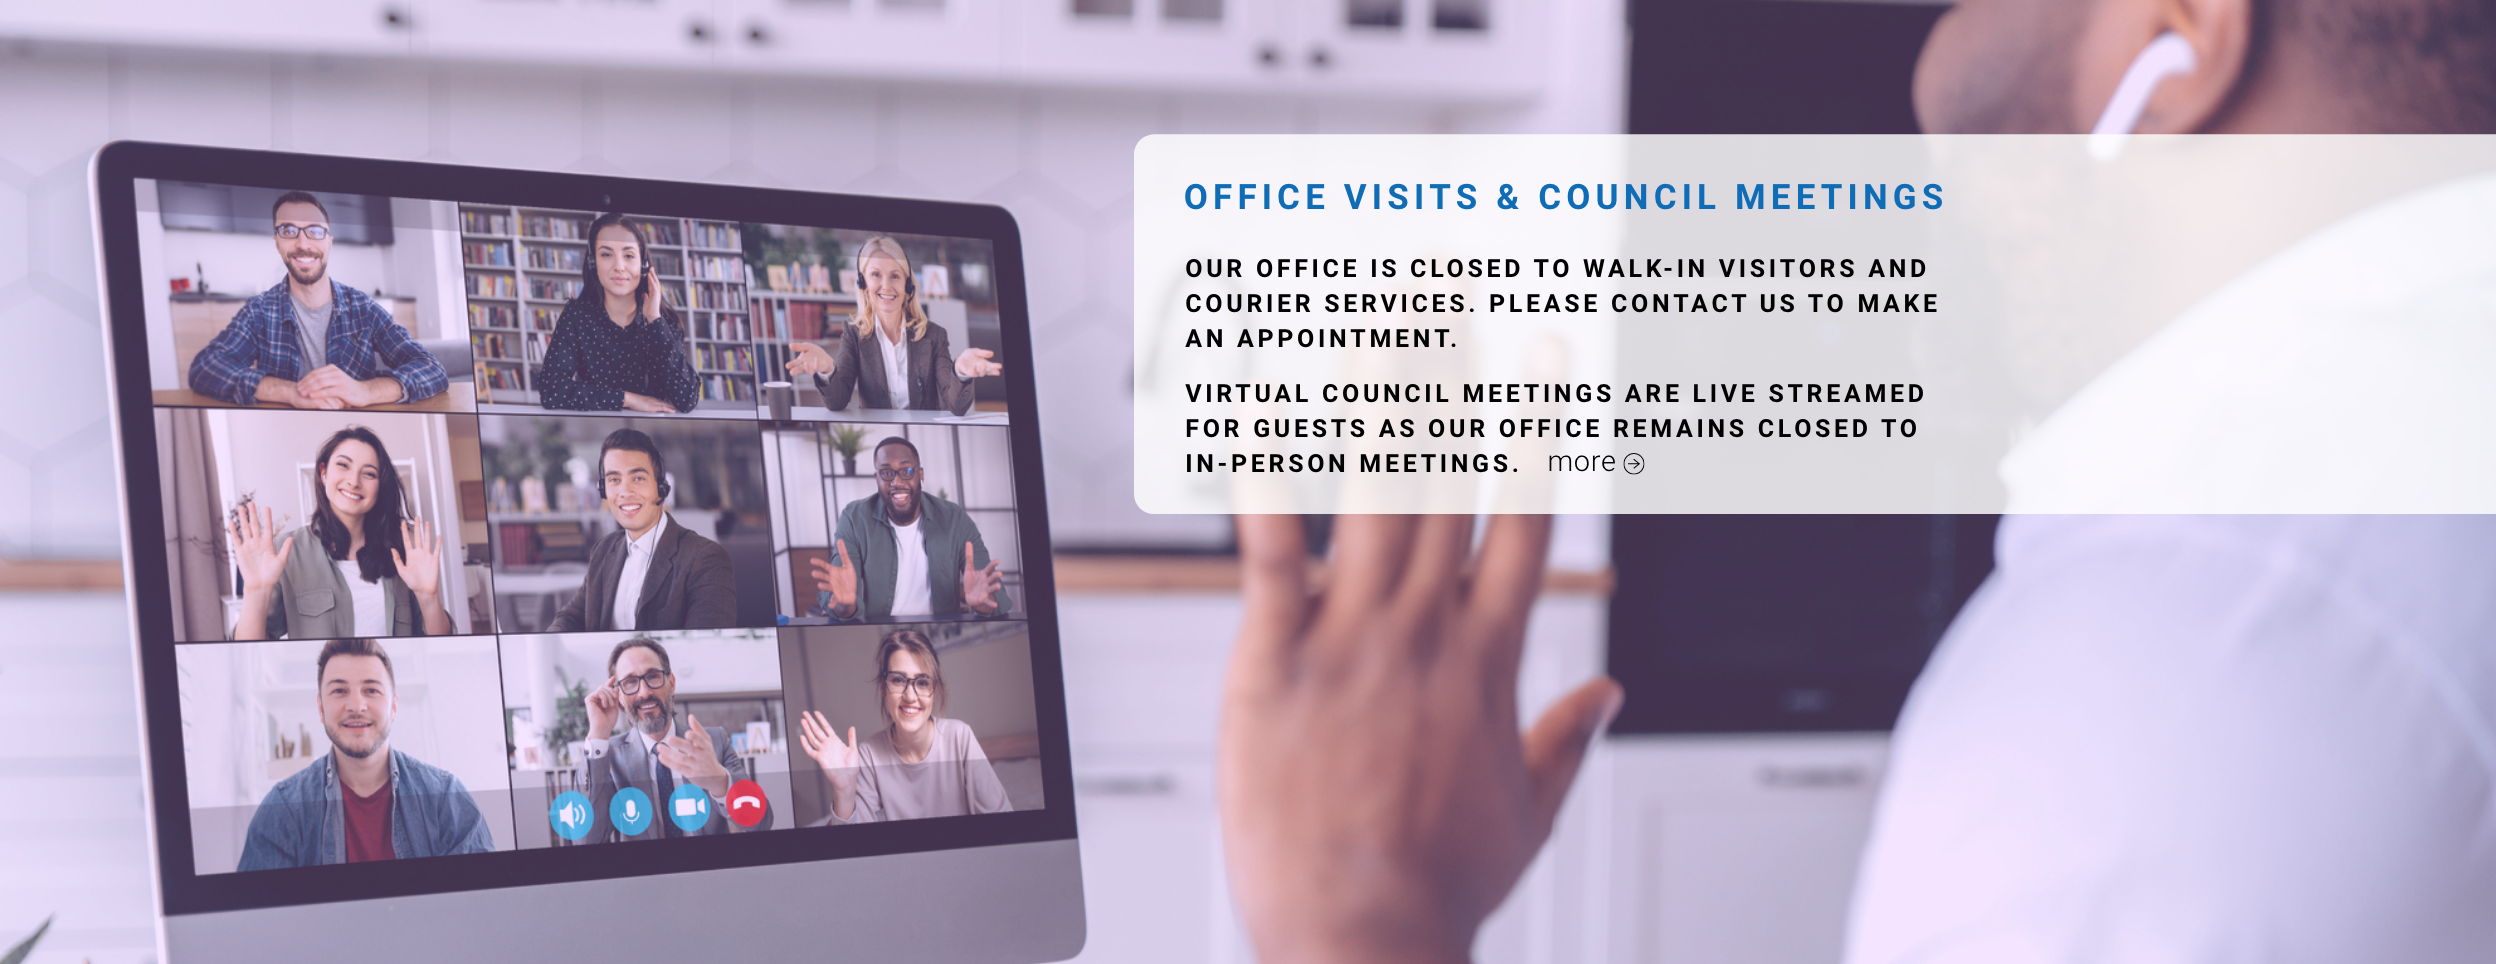 OFFICE VISITS & COUNCIL MEETINGS Our office is closed to walk-in visitors and courier services. Please contact us to make an appointment. Virtual Council meetings are live streamed for guests as our office remains closed to in-person meetings.